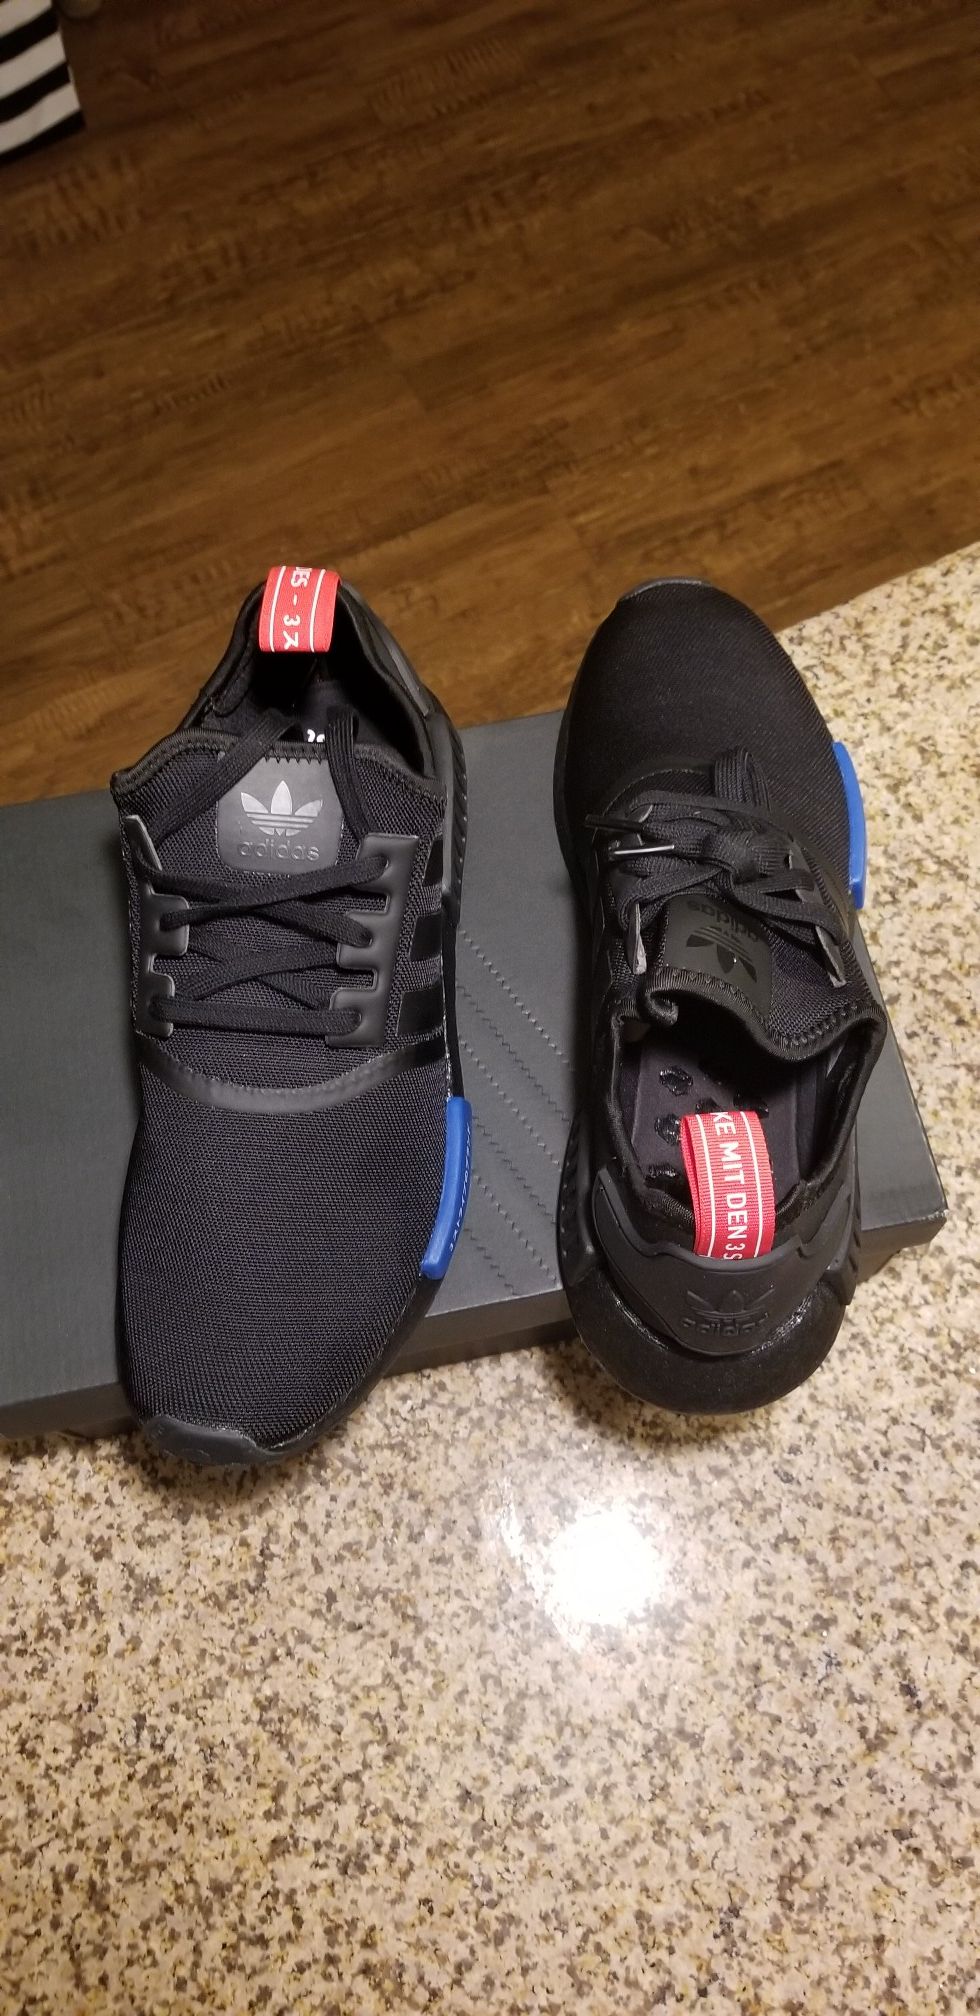 Adidas NMD R1, brand new with box, multiple sizes